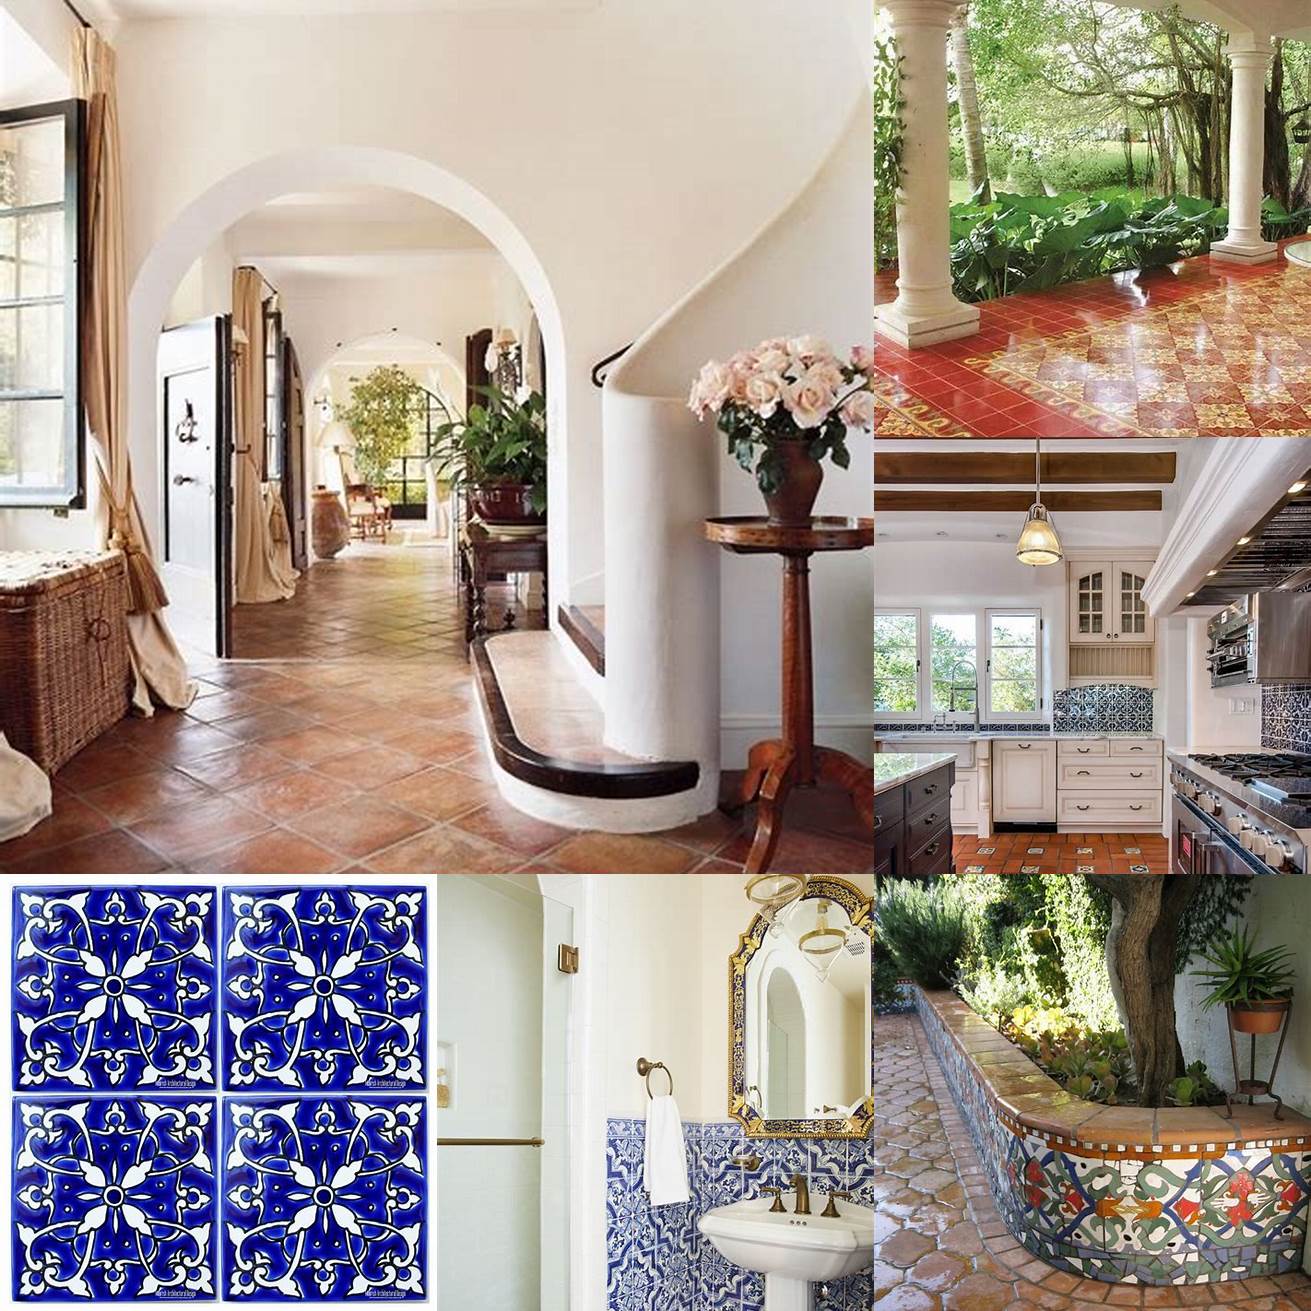 Patterned tiles with a Mediterranean flair